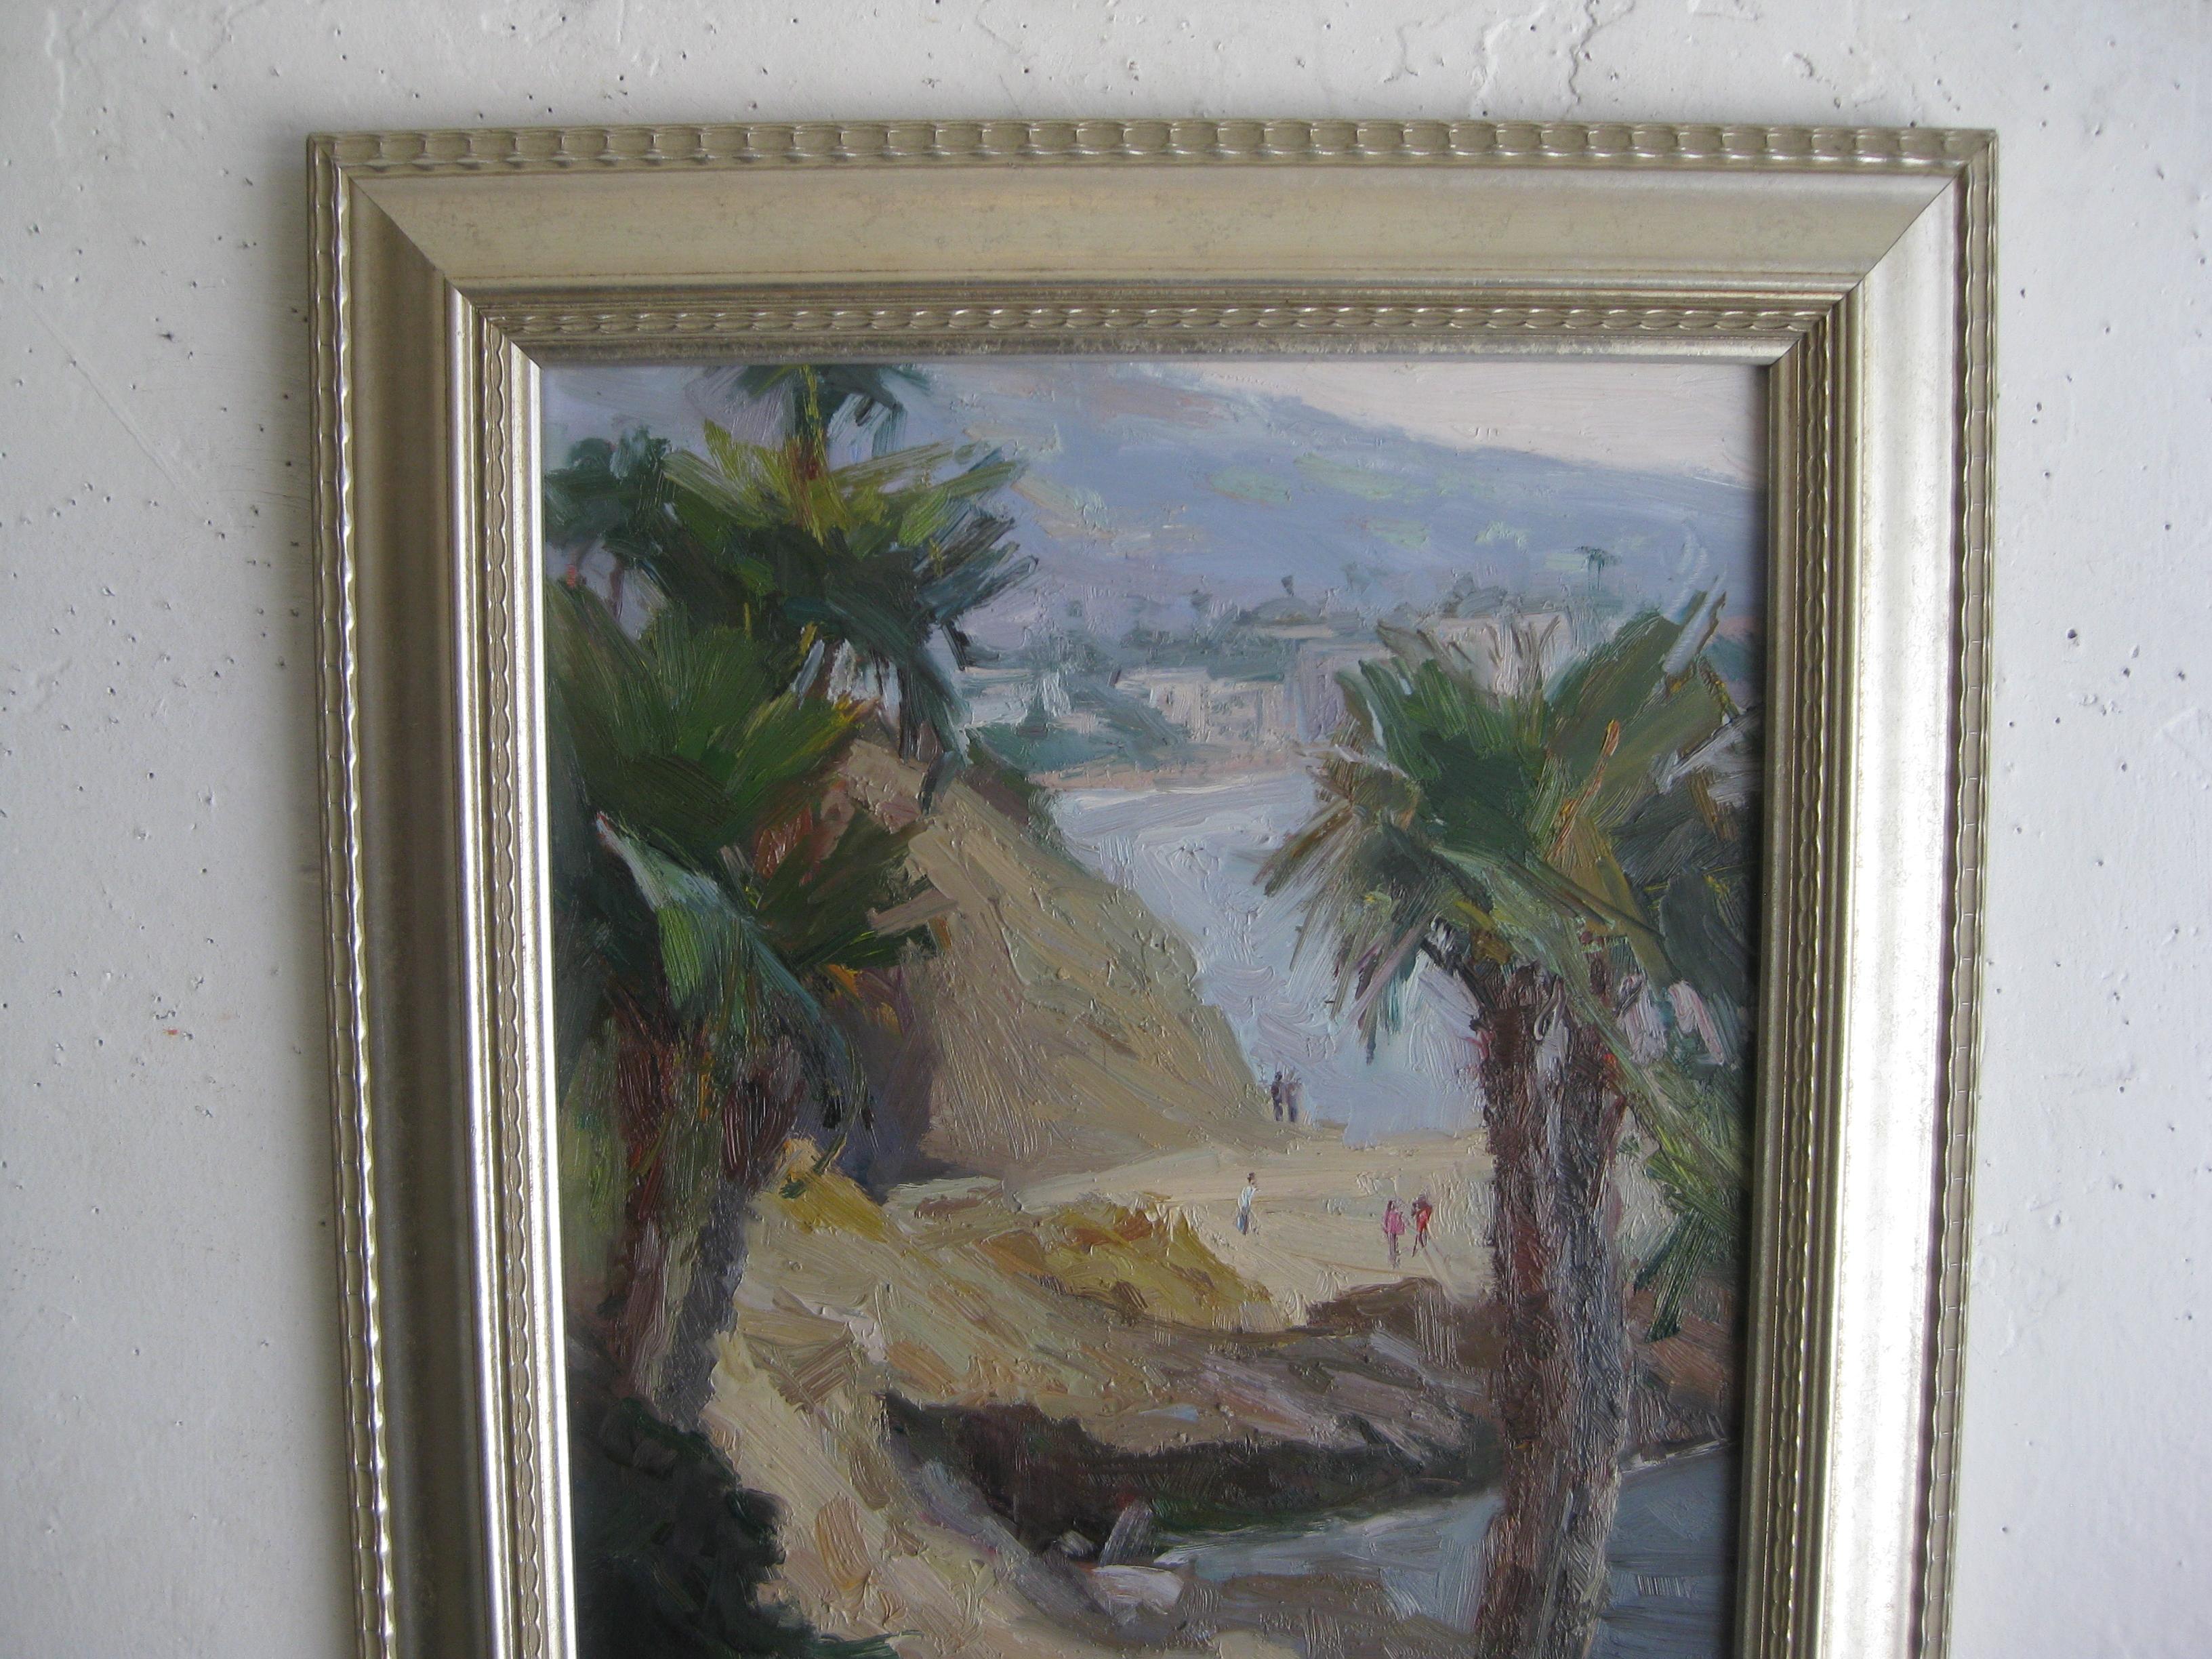 Outstanding landscape impressionist oil painting by California listed artist Jeanette Le Grue. The painting is of a beach trail with a city in the background. Possible Santa Barbara? Signed in the lower corner. The oil painting is painted on